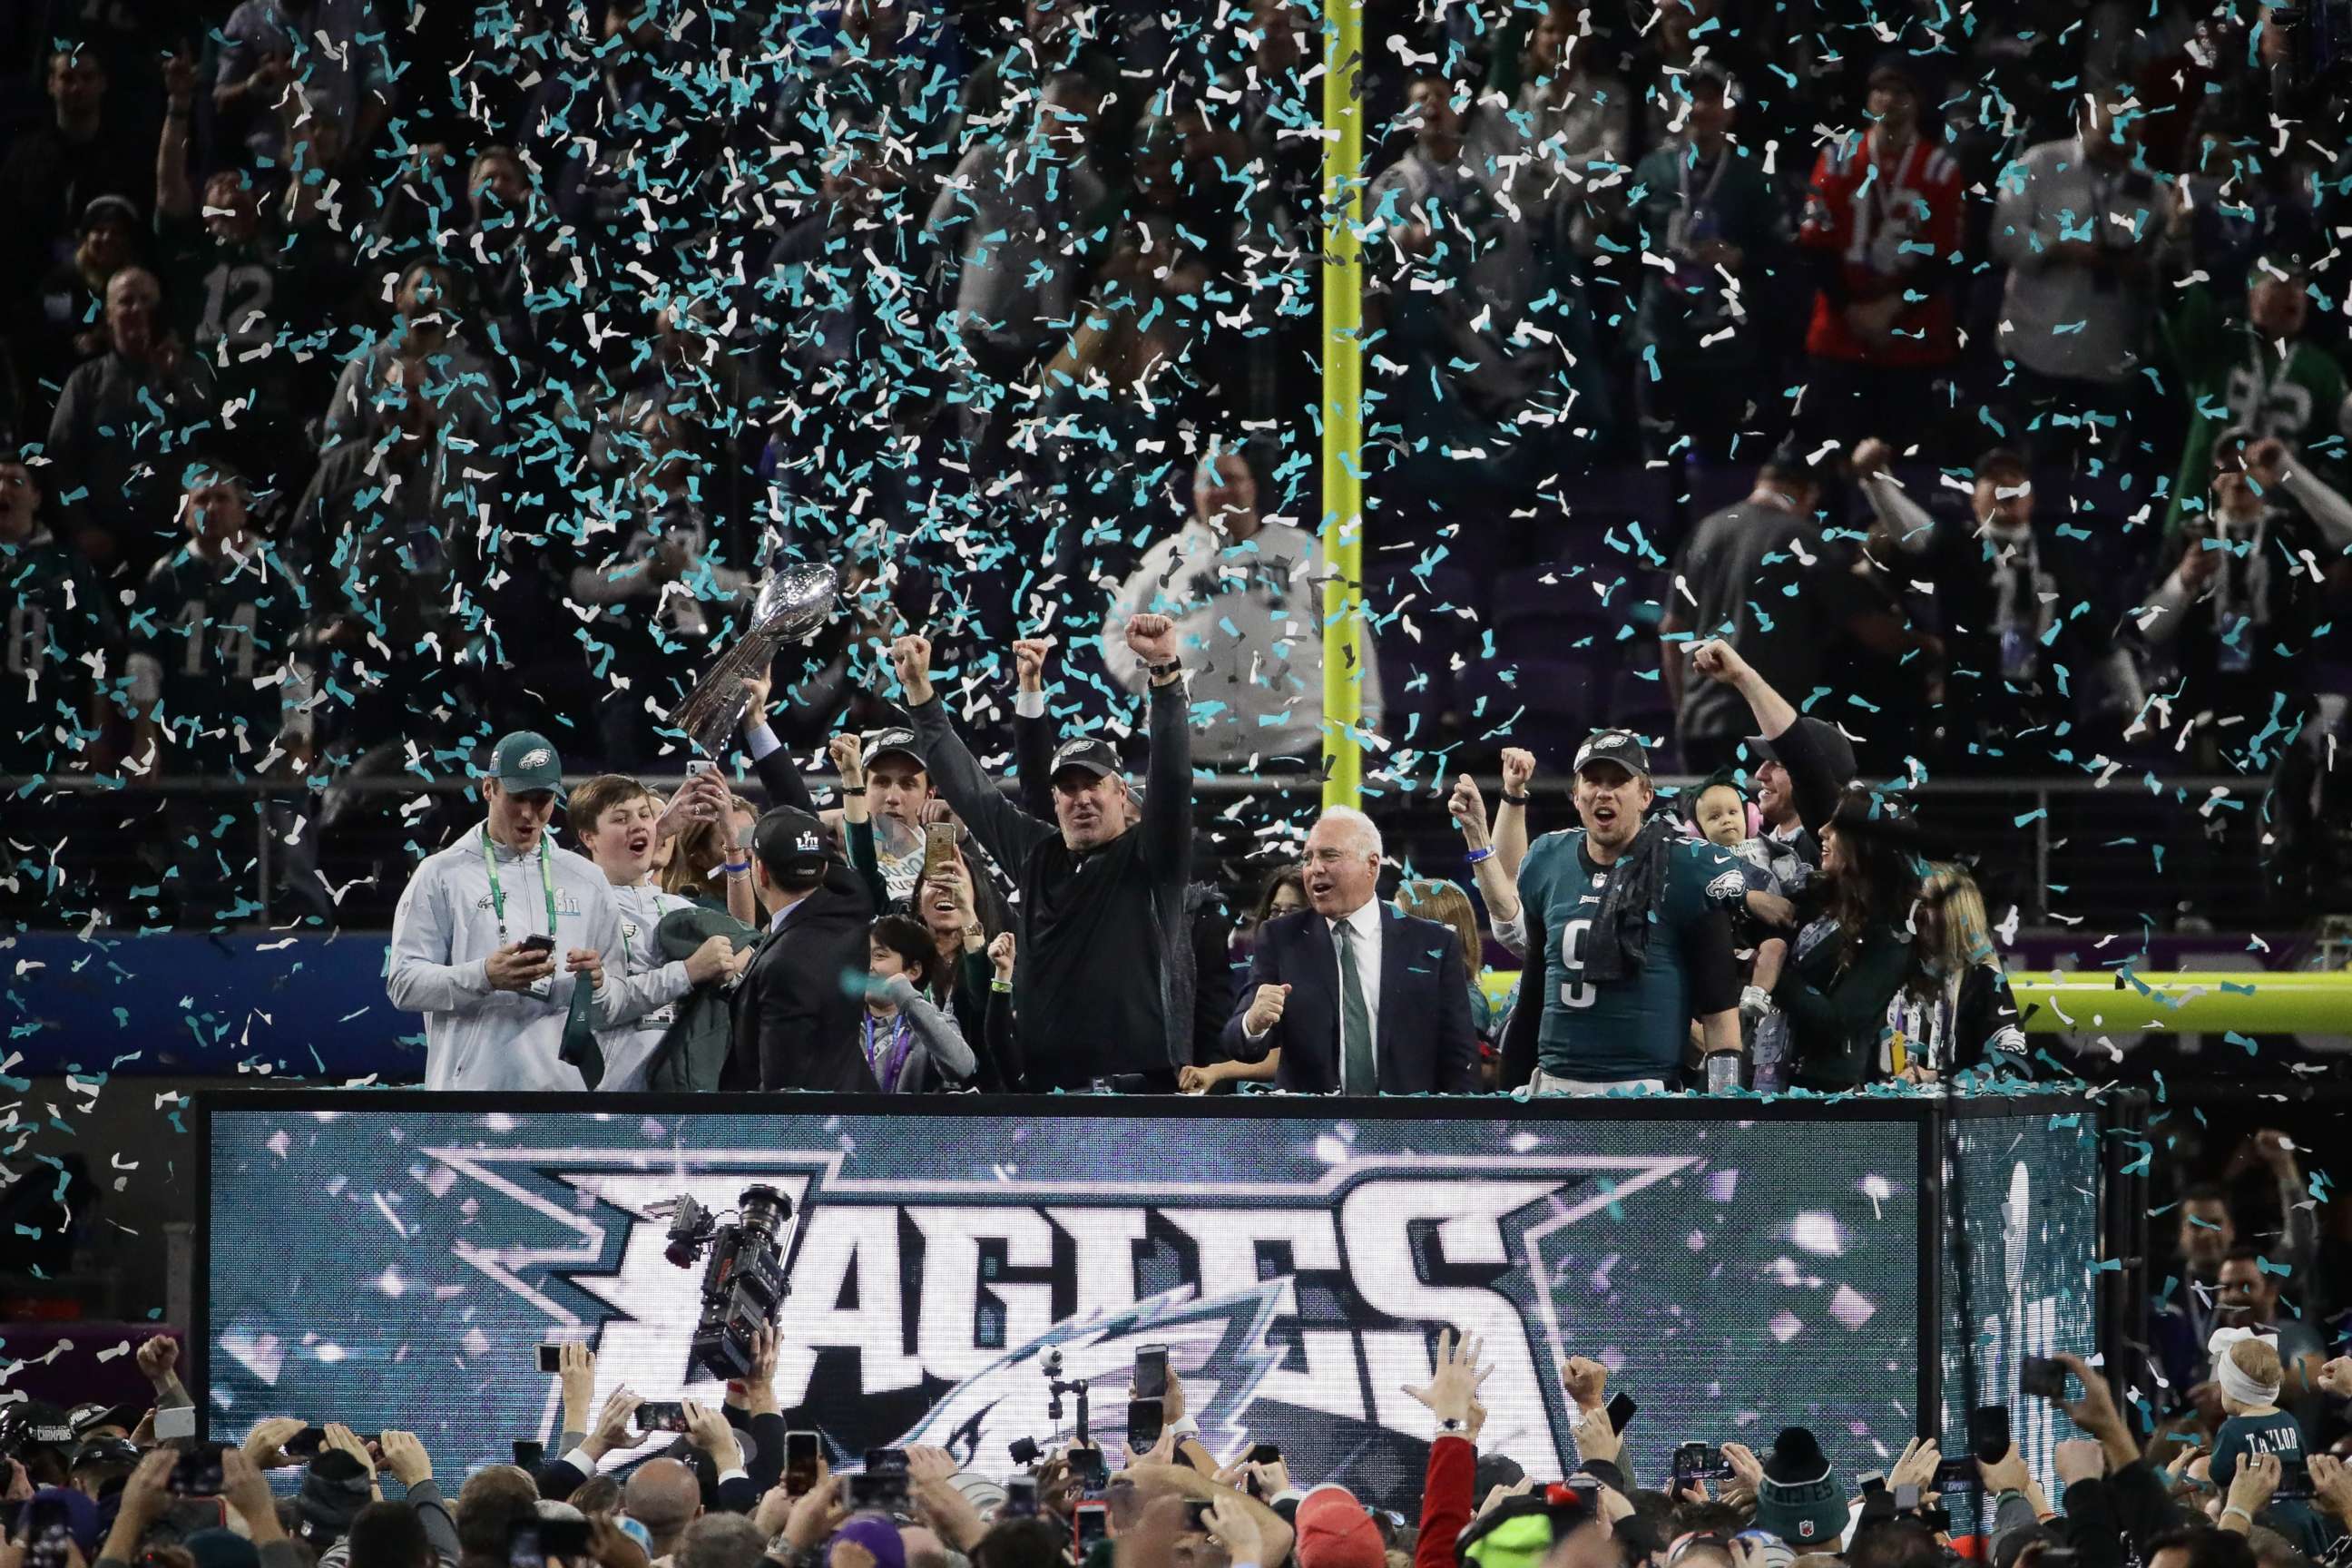 philly eagles super bowl wins